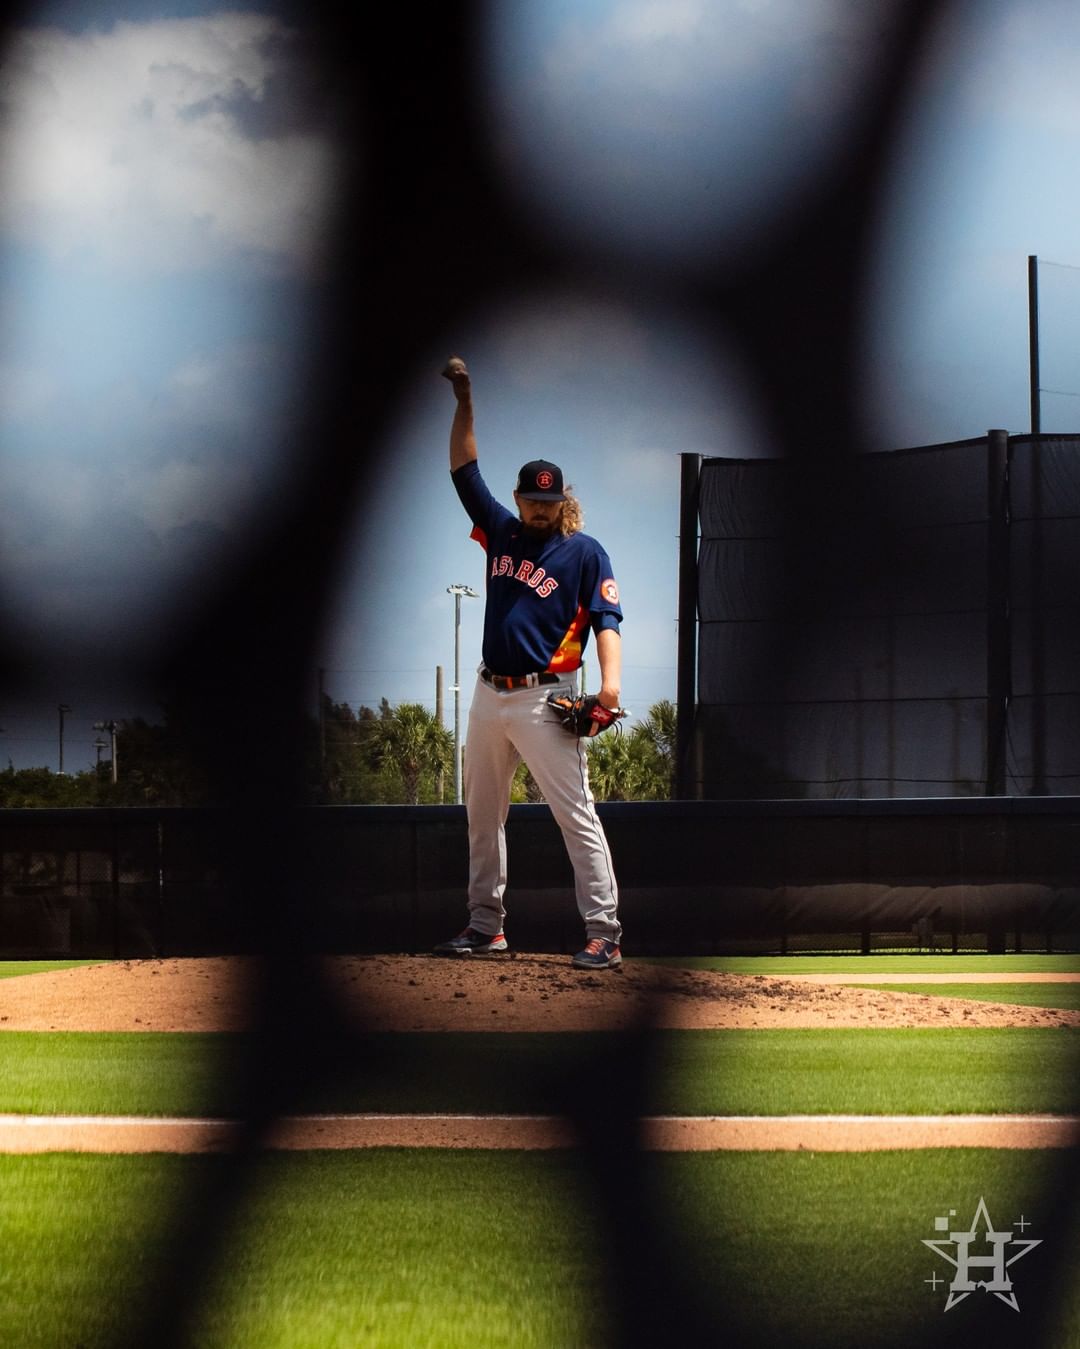 Pitcher perfect scenes in West Palm.  #AstrosST...